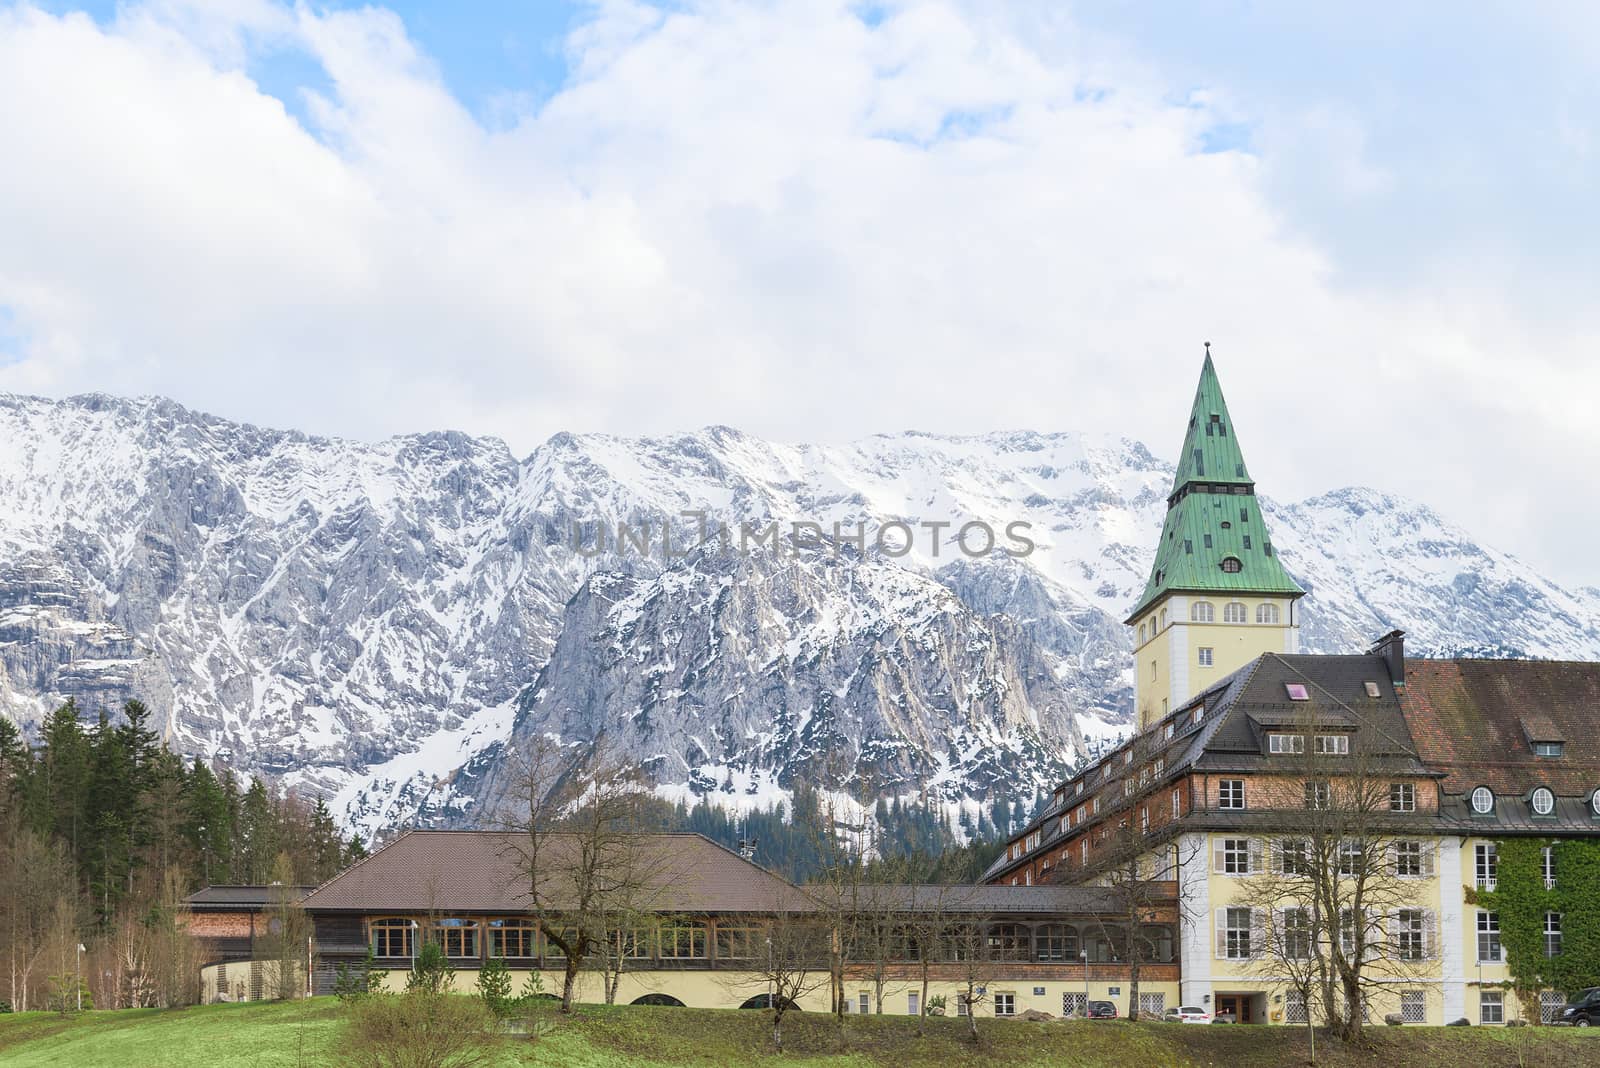 Klais, Germany - April 26, 2015: Schloss Elmau is a luxury hotel which will be the site of the 41st G7 summit in June. This prestigious five-star hotel today offers 123 rooms and suites. It is among the Leading Hotels of the World.